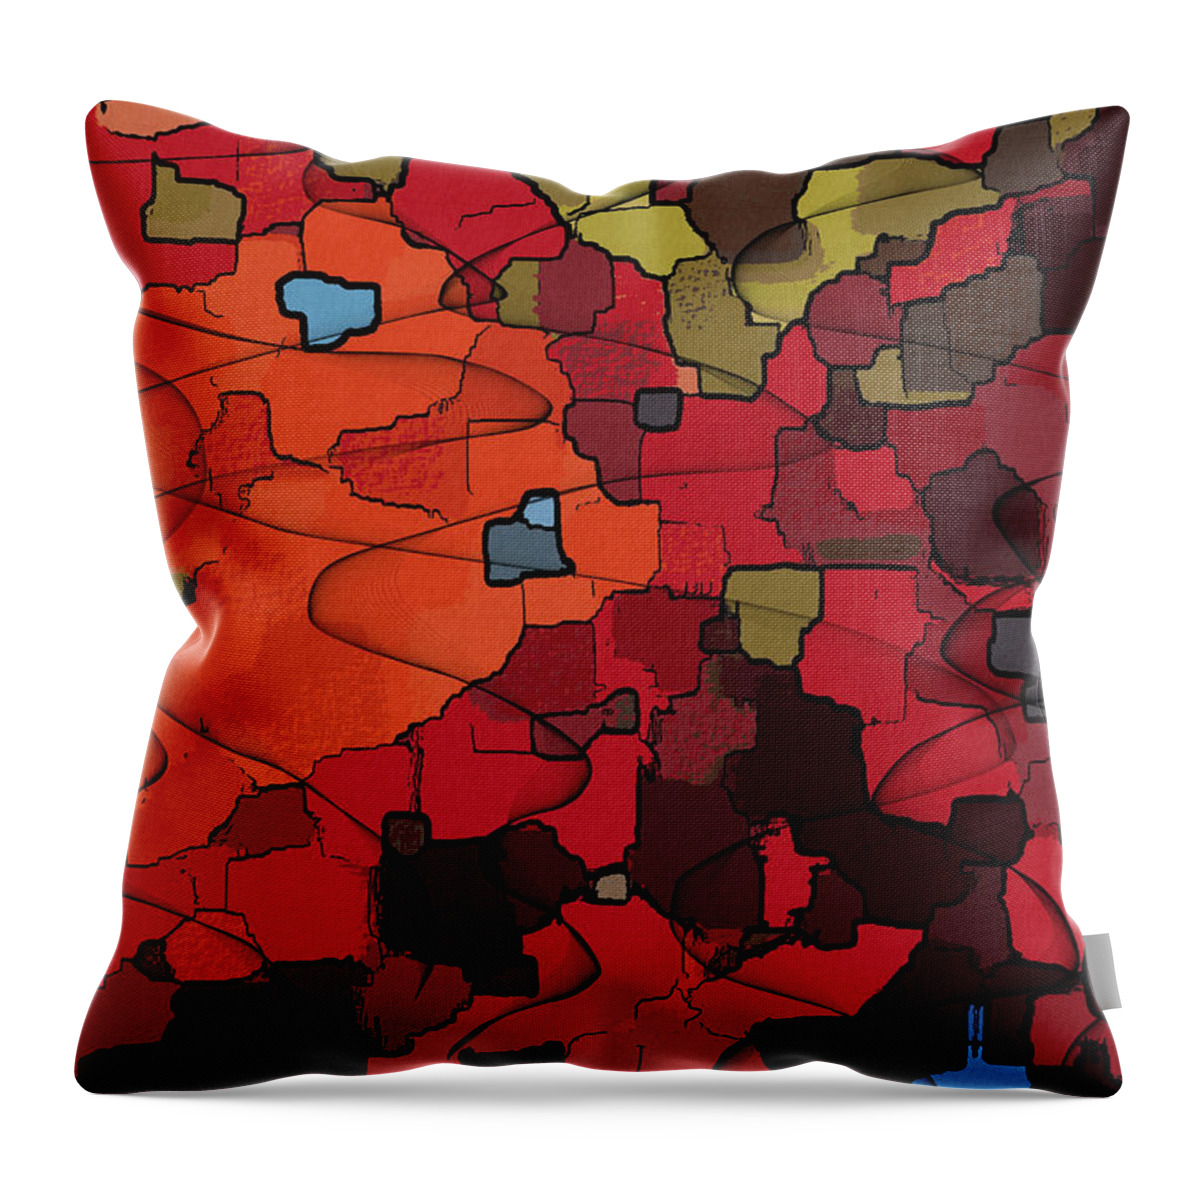 Colorful Throw Pillow featuring the digital art Colorful Abstract Camouflage Patchwork with Scribbles by Shelli Fitzpatrick